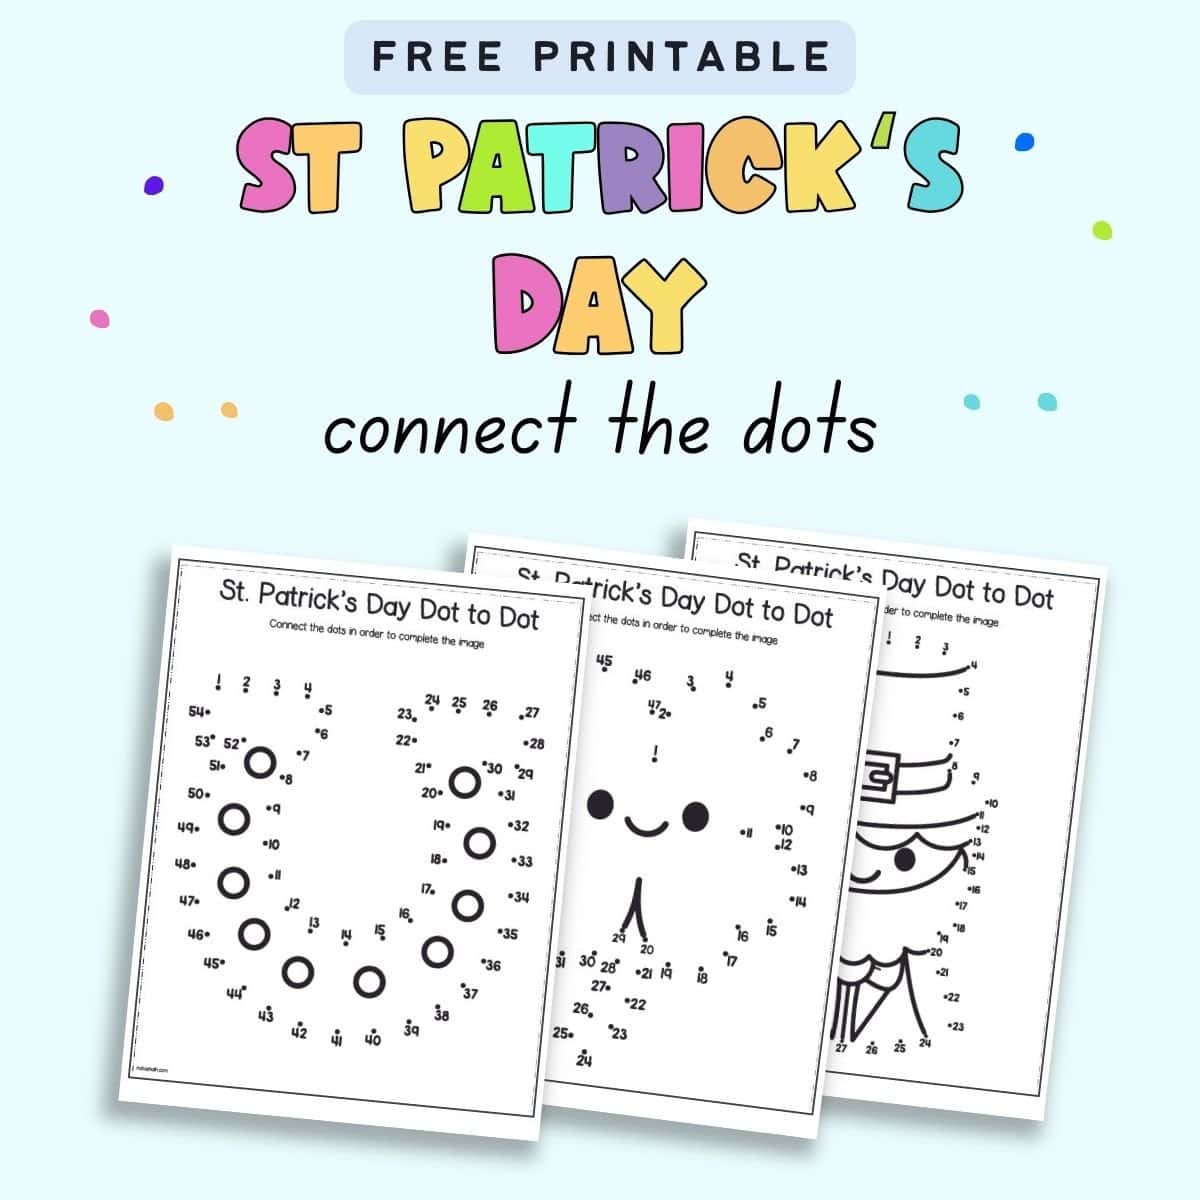 Text "free printable St Patrick's Day connect the dots" with an image of three dot to dot images